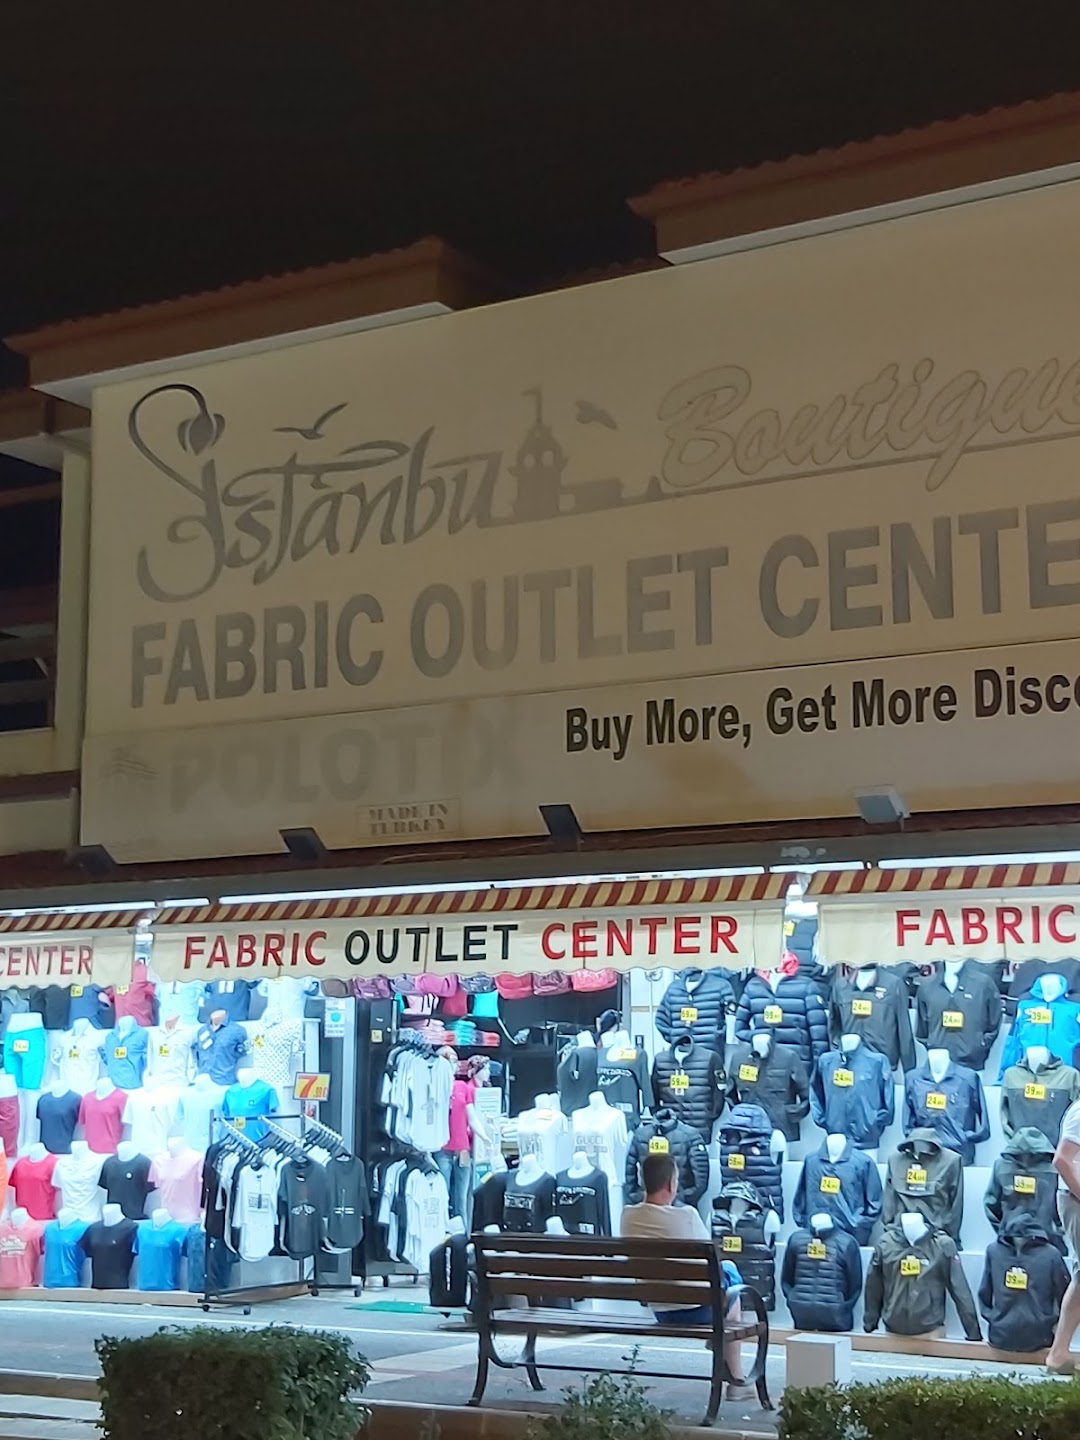 stanbul Boutique Fabric Outlet Center